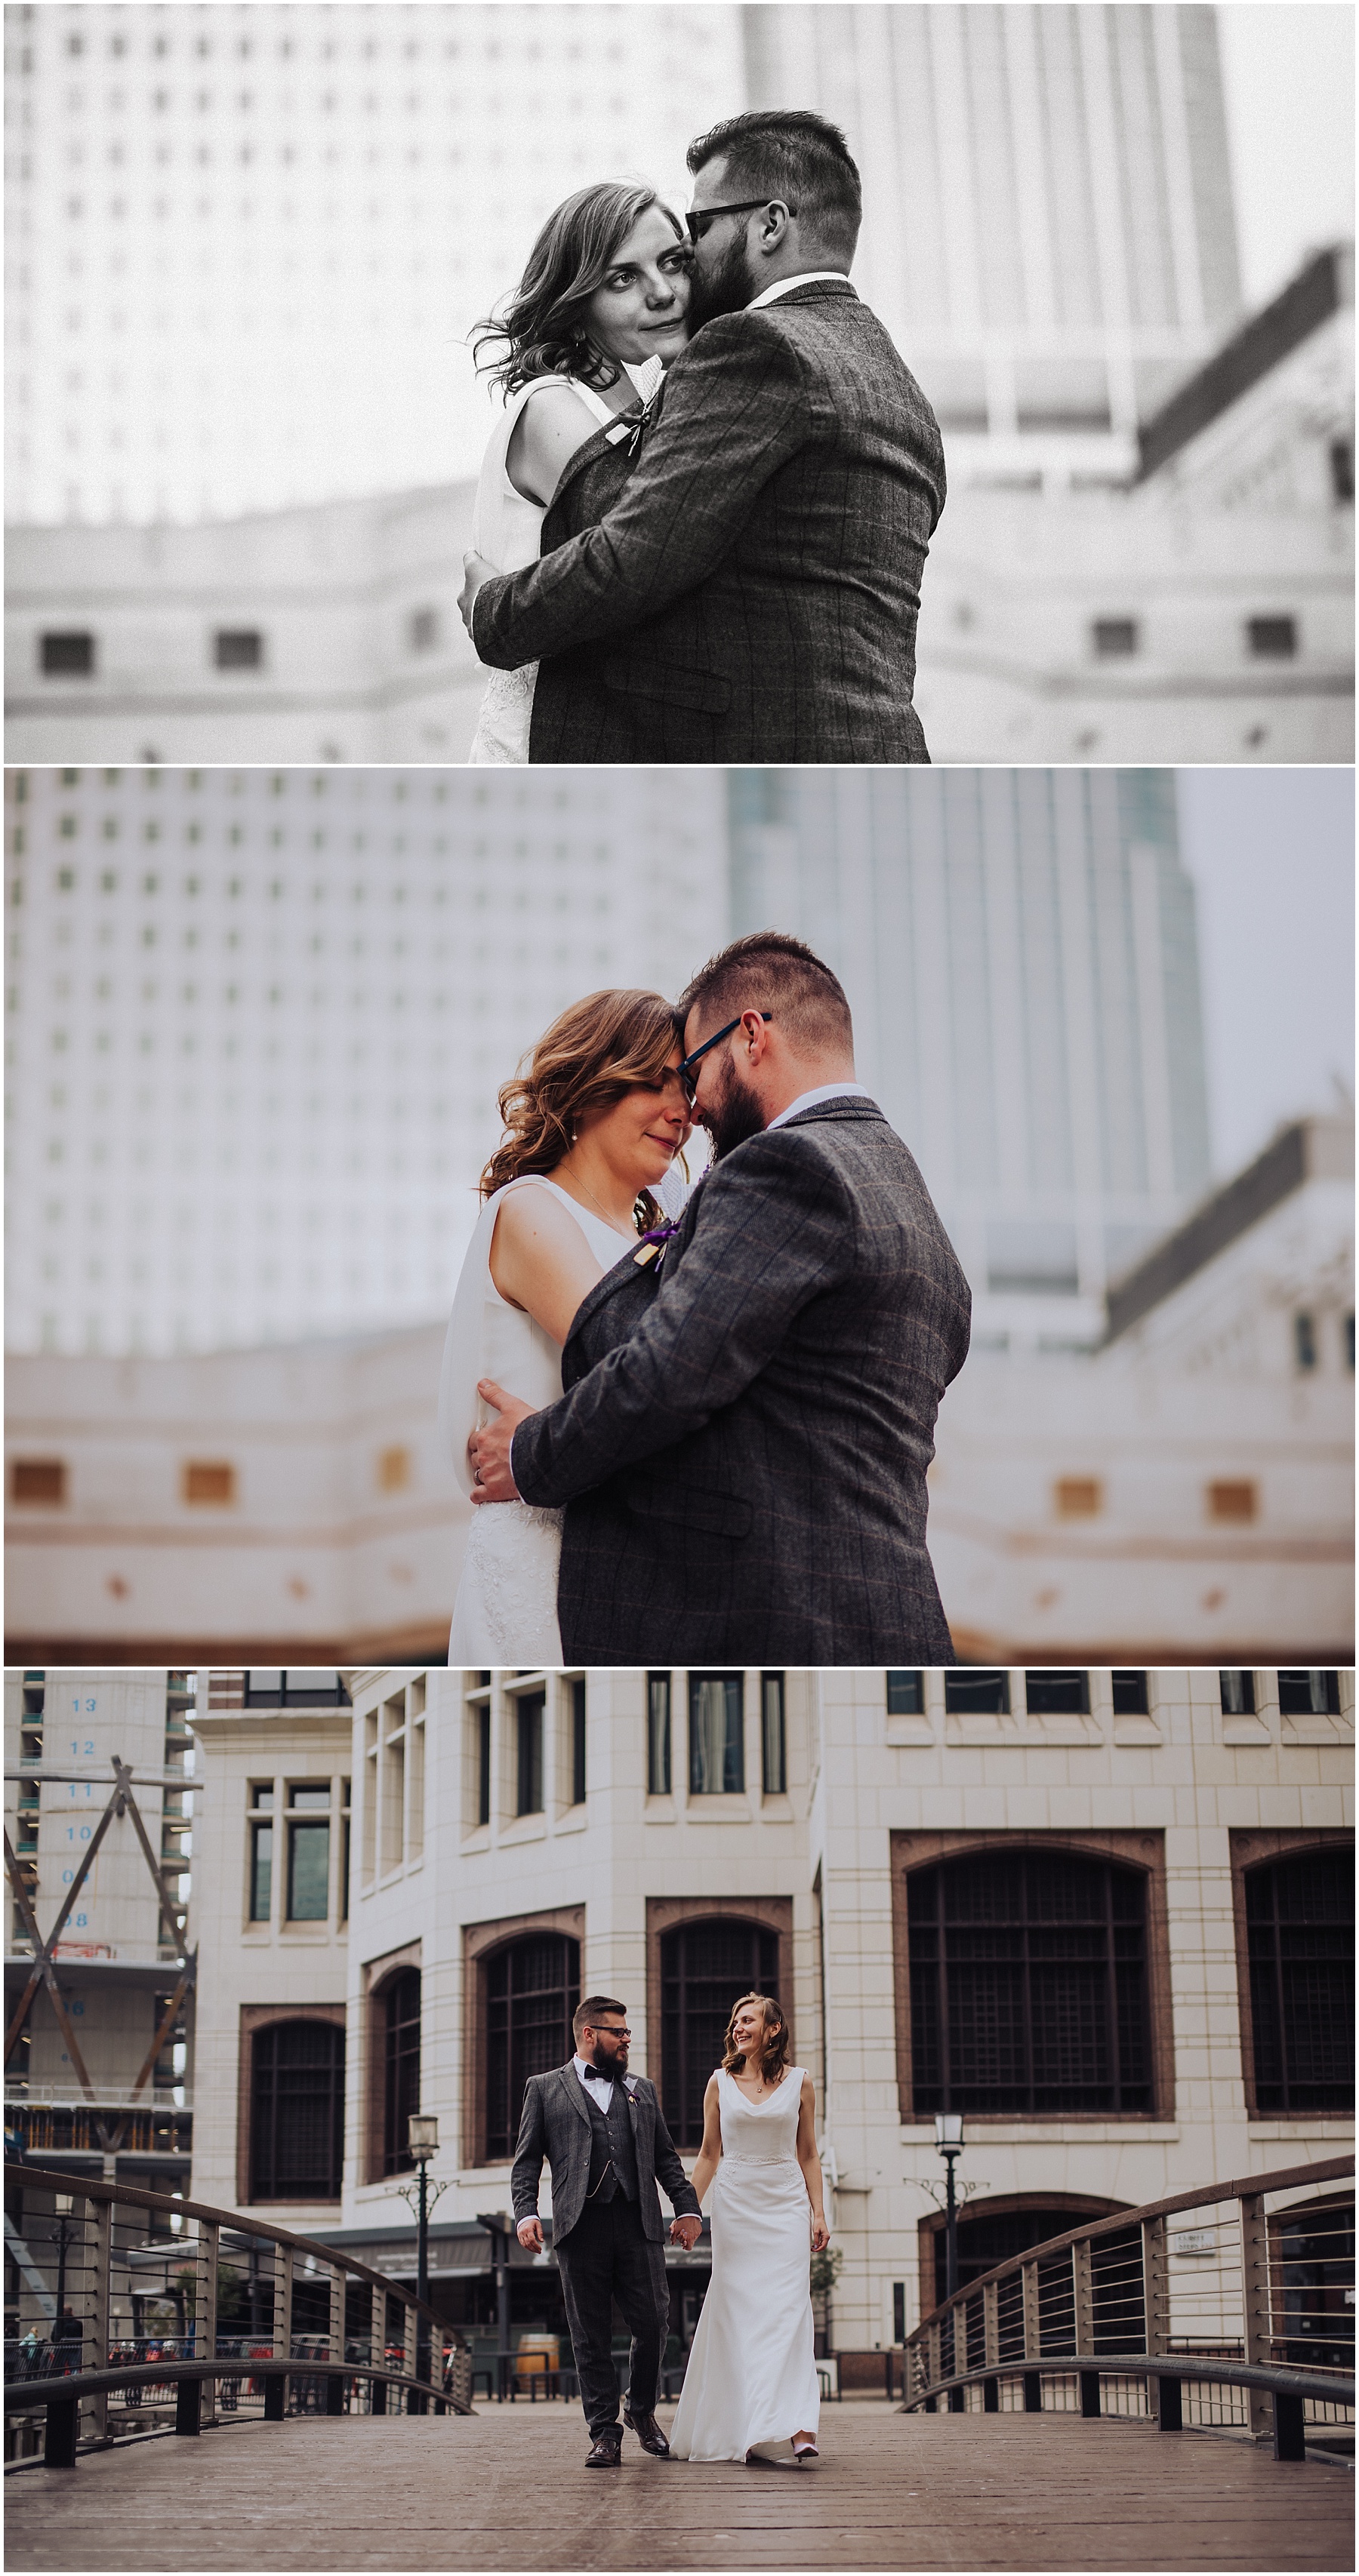 wedding photographer at canary wharf in london